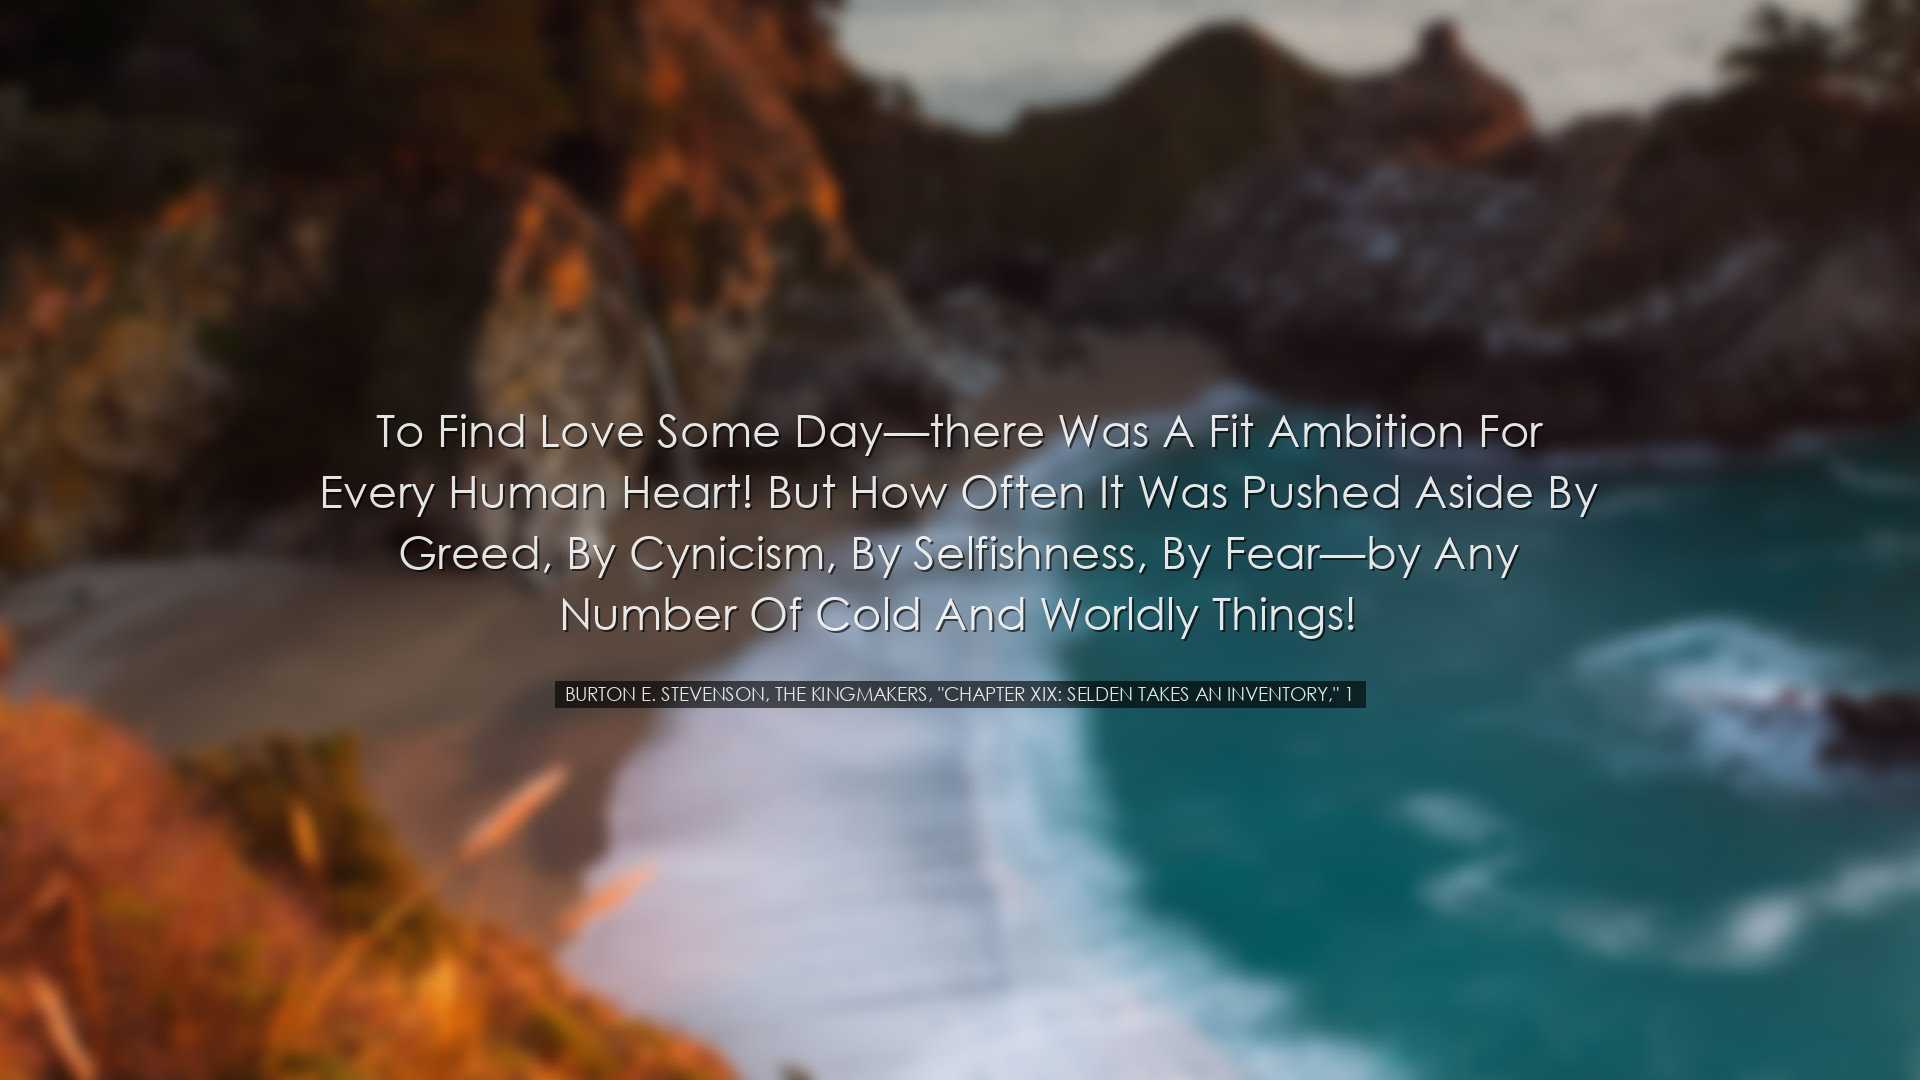 To find love some day—there was a fit ambition for every hum